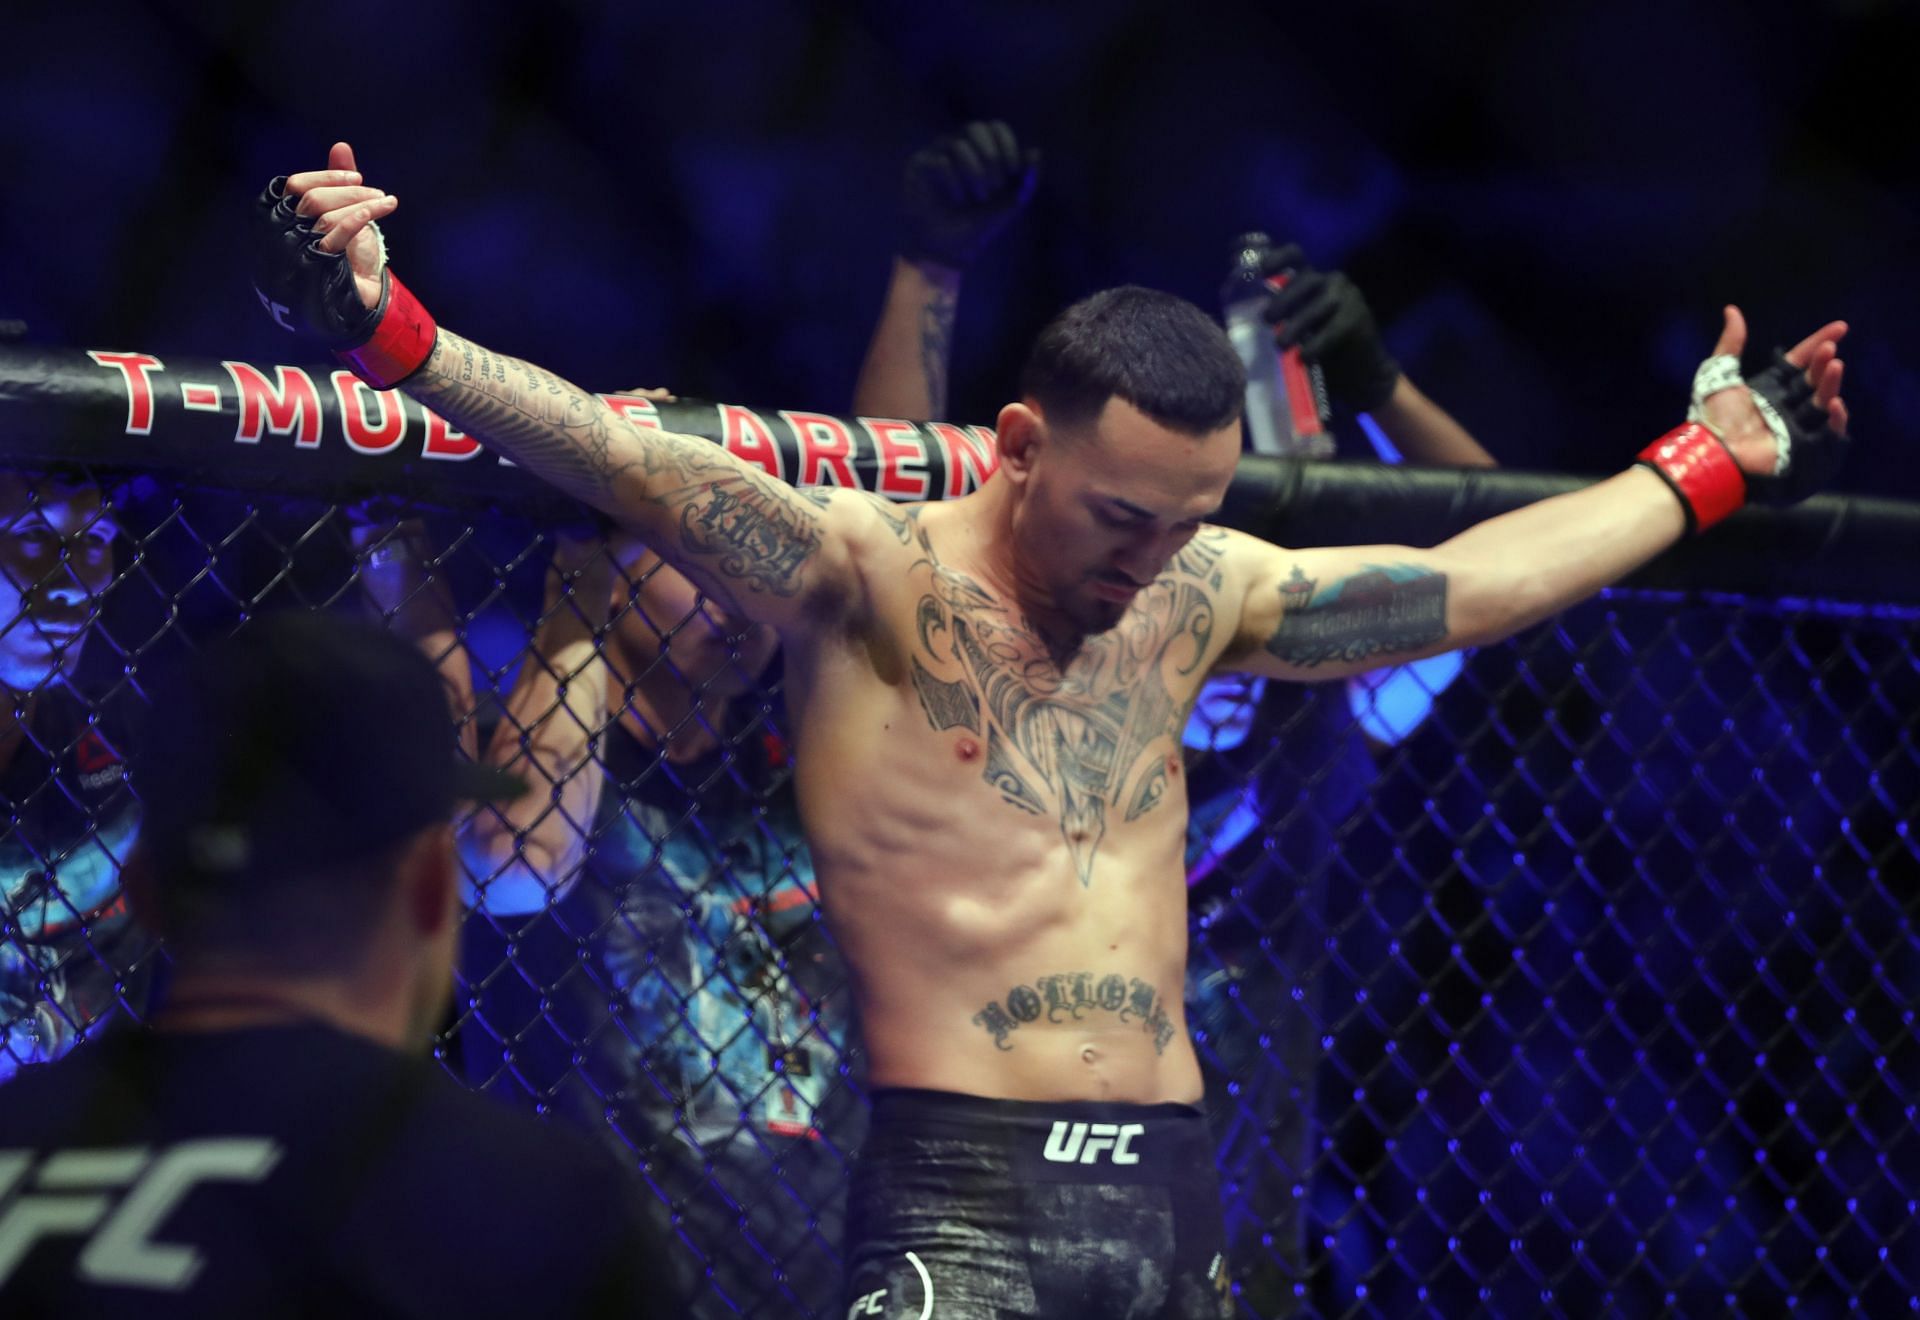 Max Holloway will be gunning for another shot at the UFC featherweight title if he wins this weekend